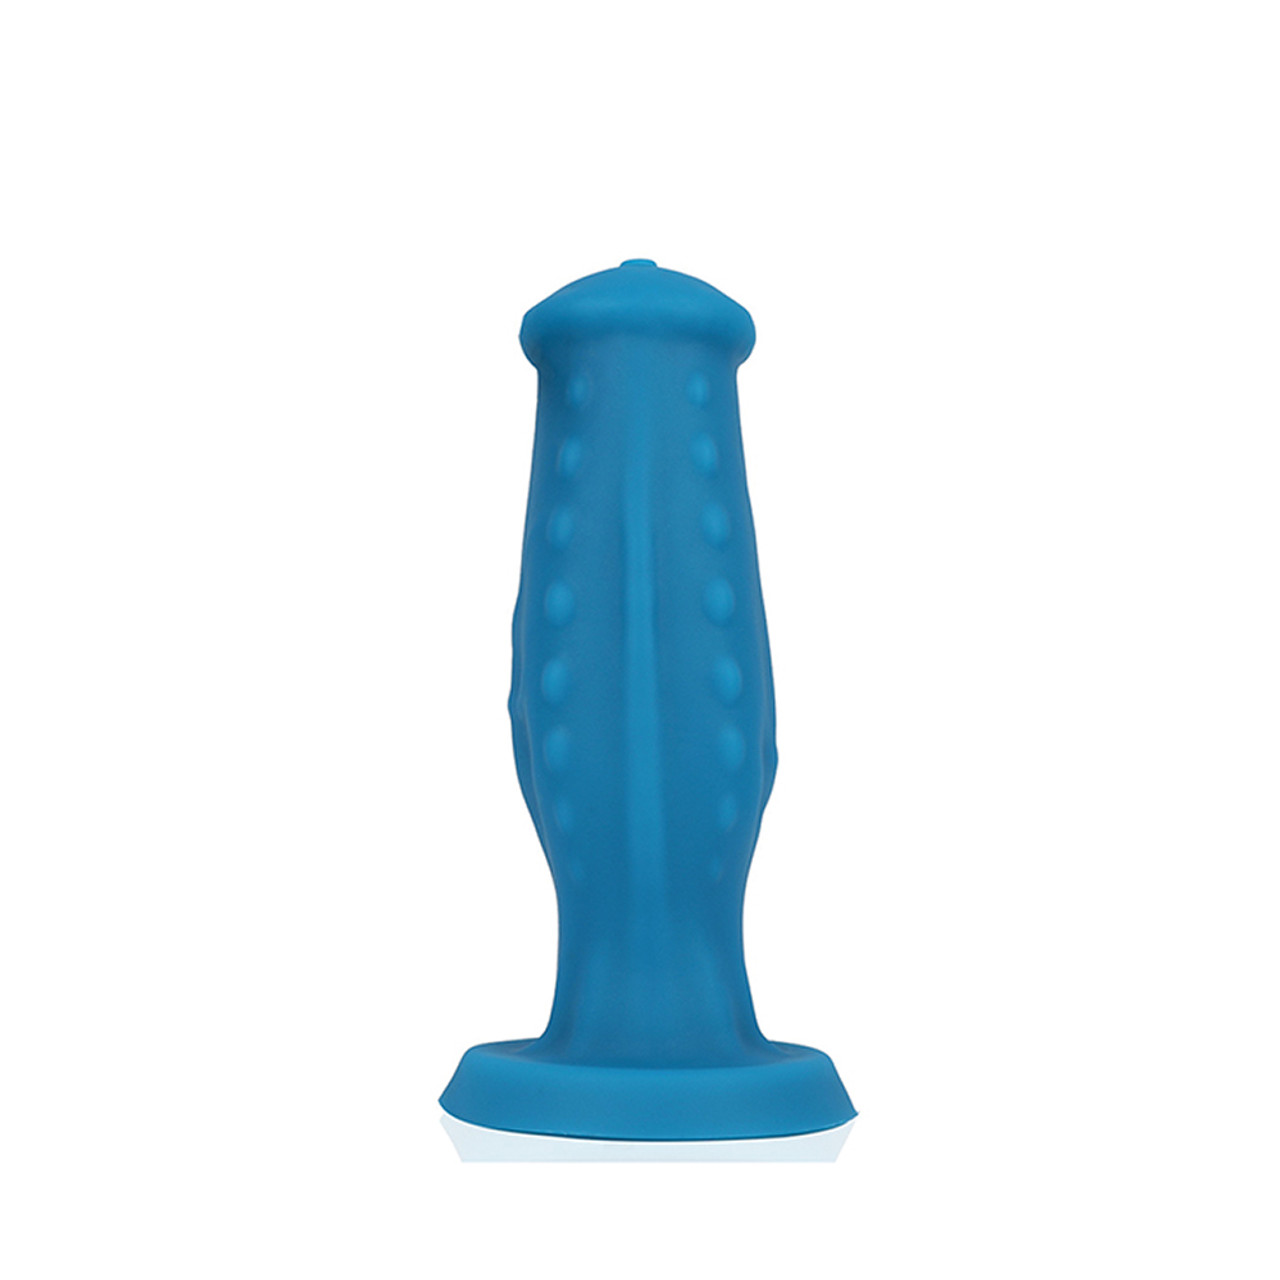 Buy the Jake Alien Equine Textured Liquid Silicone Dildo in XL Extra Large Blue